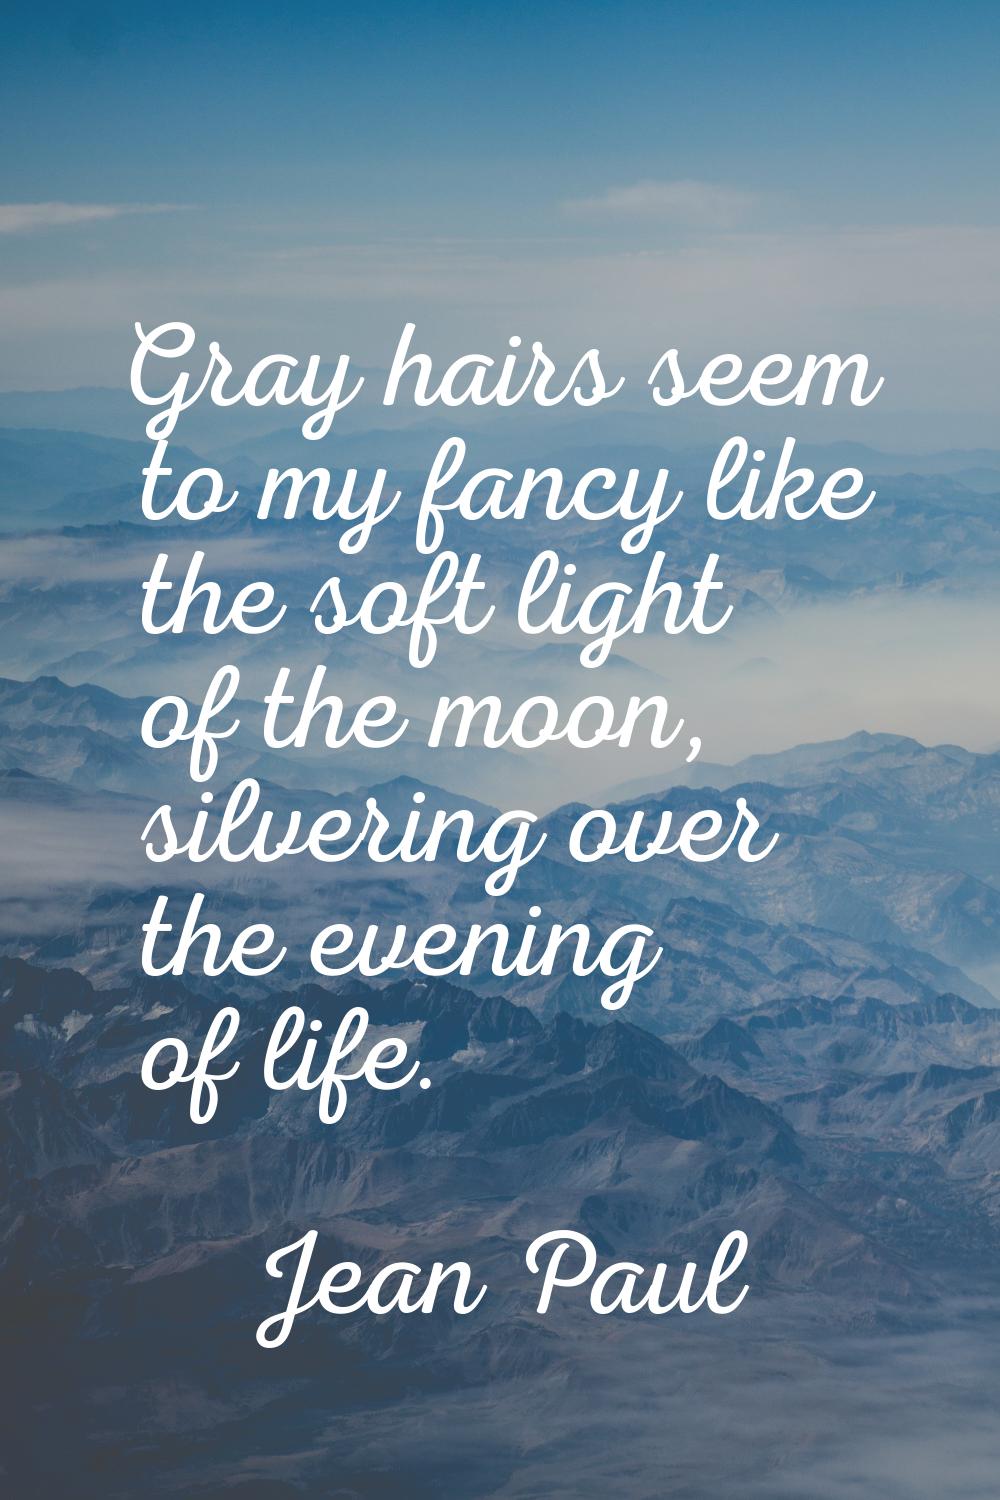 Gray hairs seem to my fancy like the soft light of the moon, silvering over the evening of life.